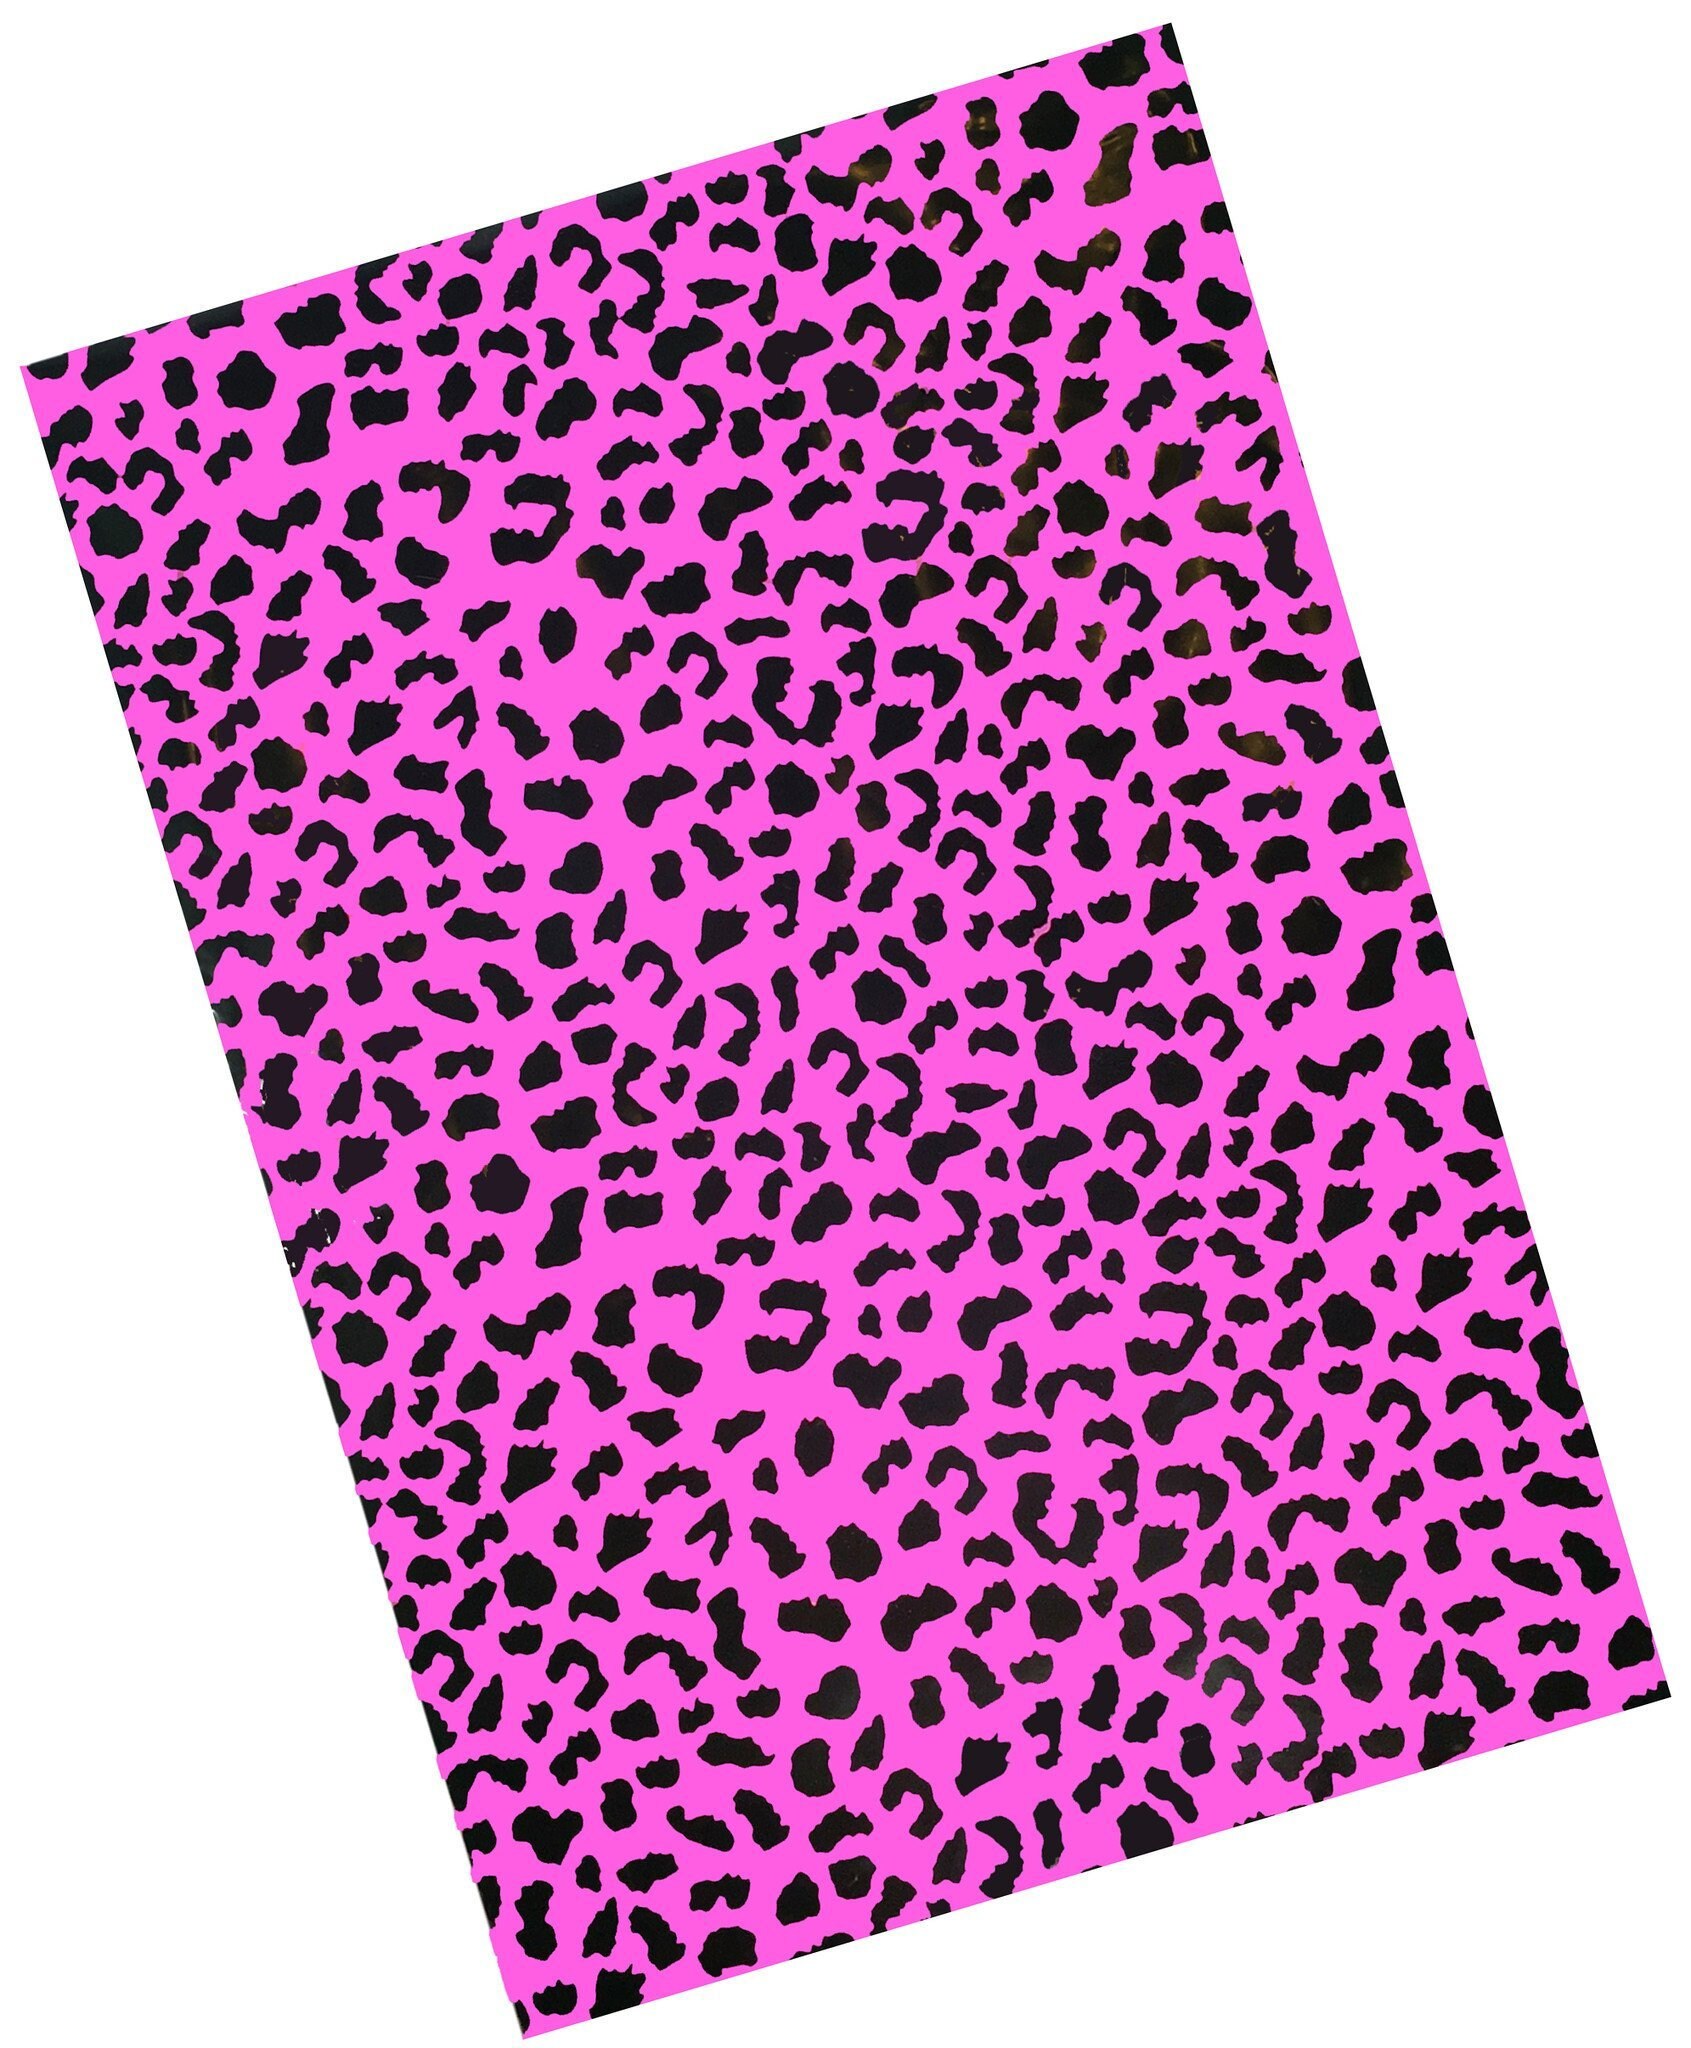 Buy 6x9 Pink Cheetah Poly Mailers Designer Poly Mailers Online India - Etsy